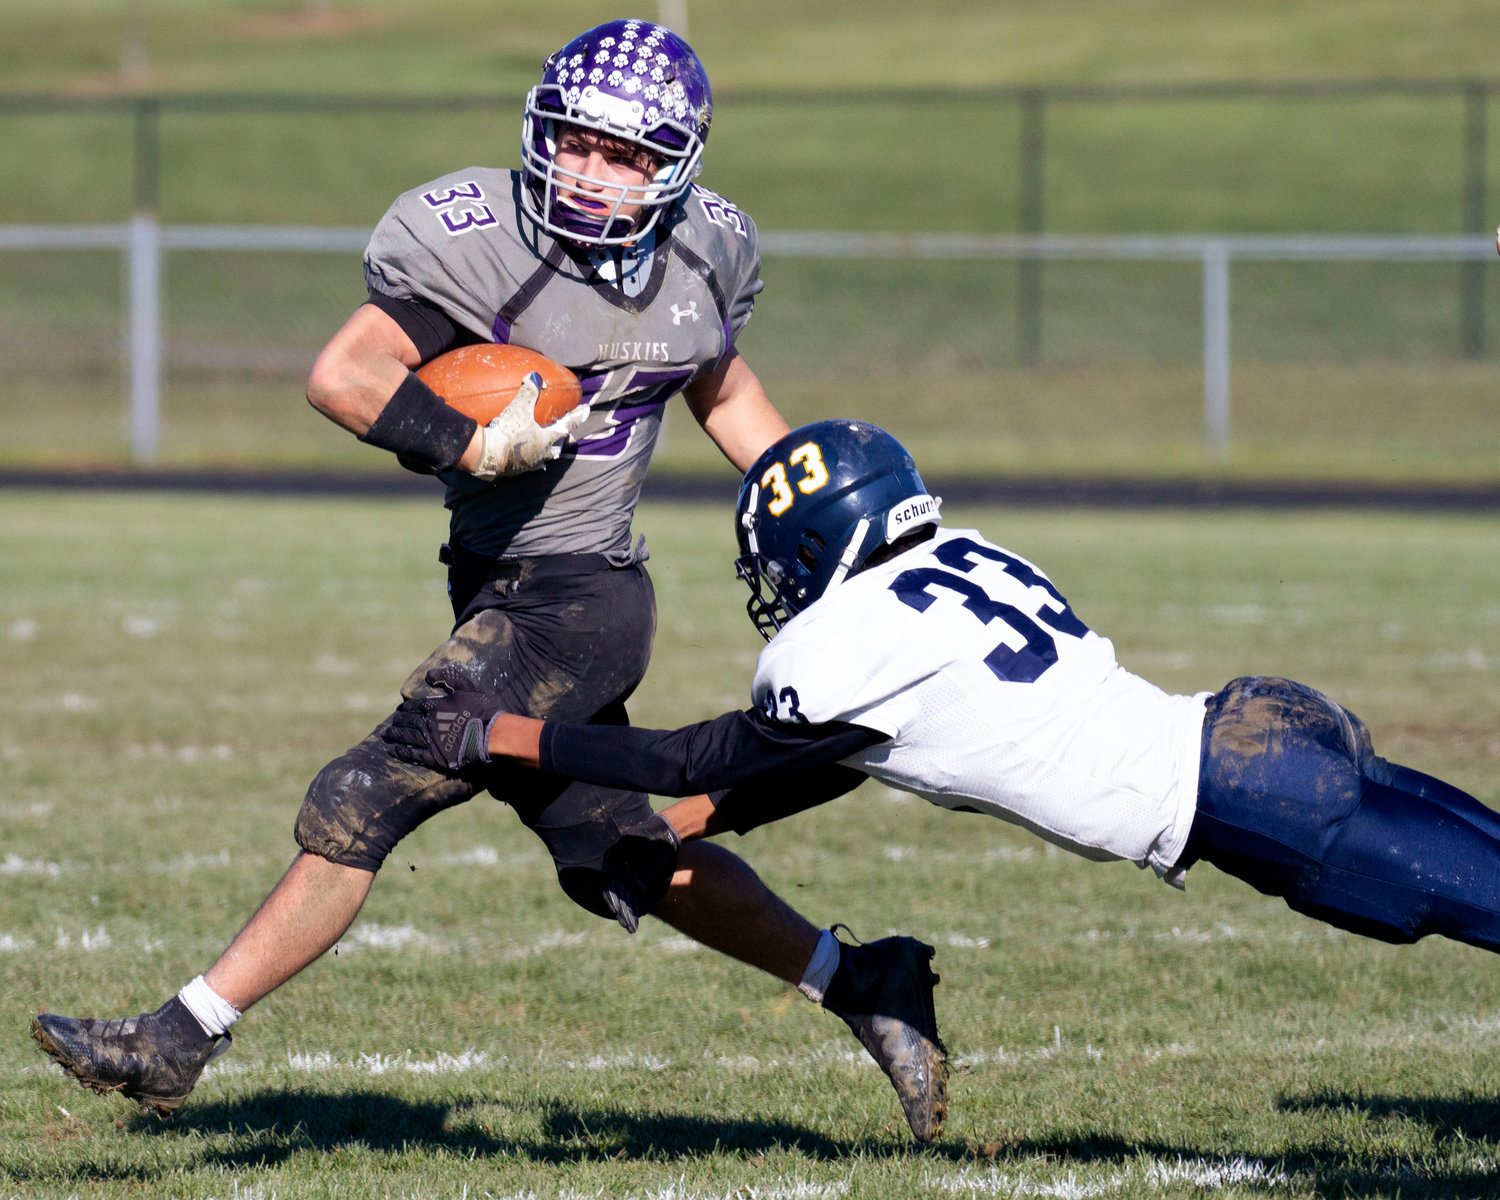 Running back Brock Pacheco speeds around an Eagles defender in the third quarter.